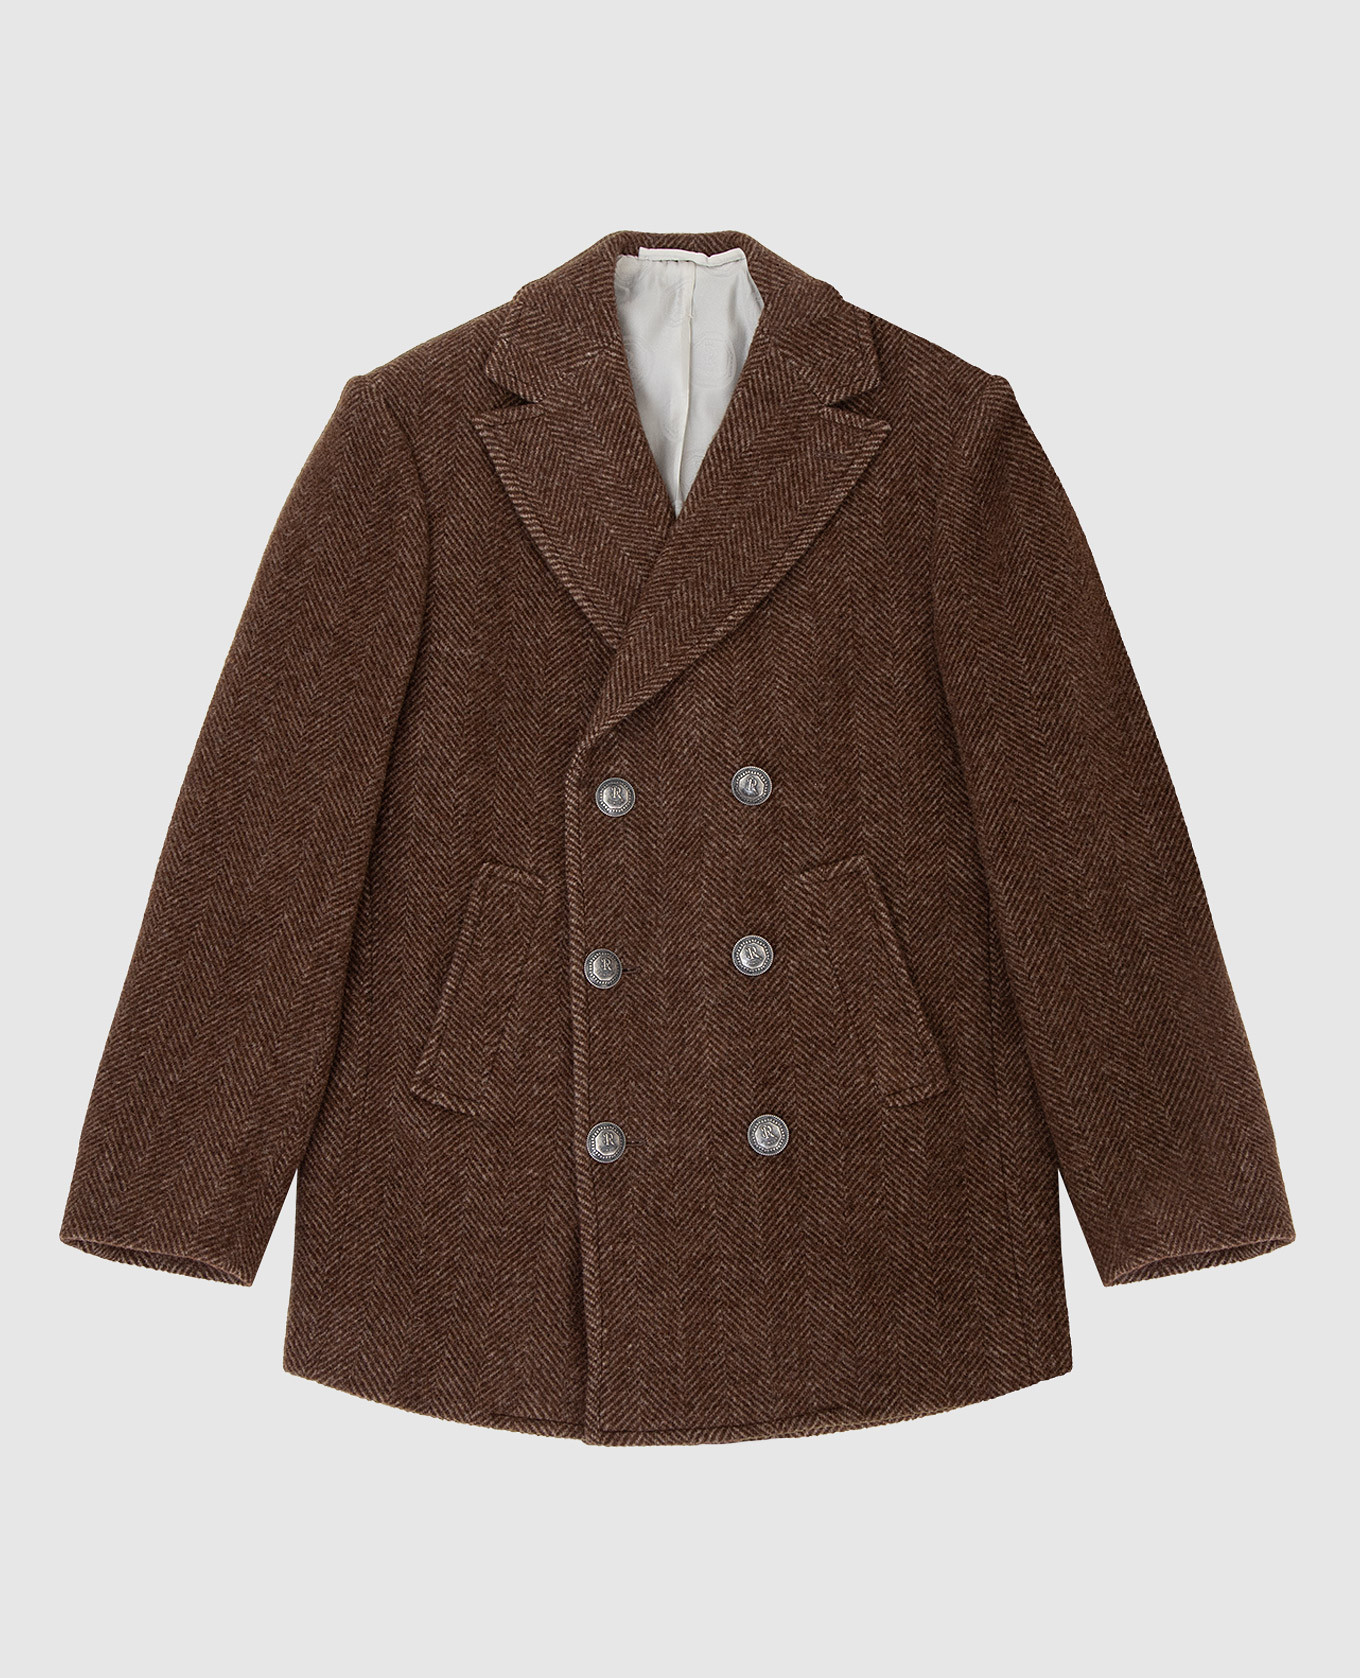 Children's double-breasted brown wool coat